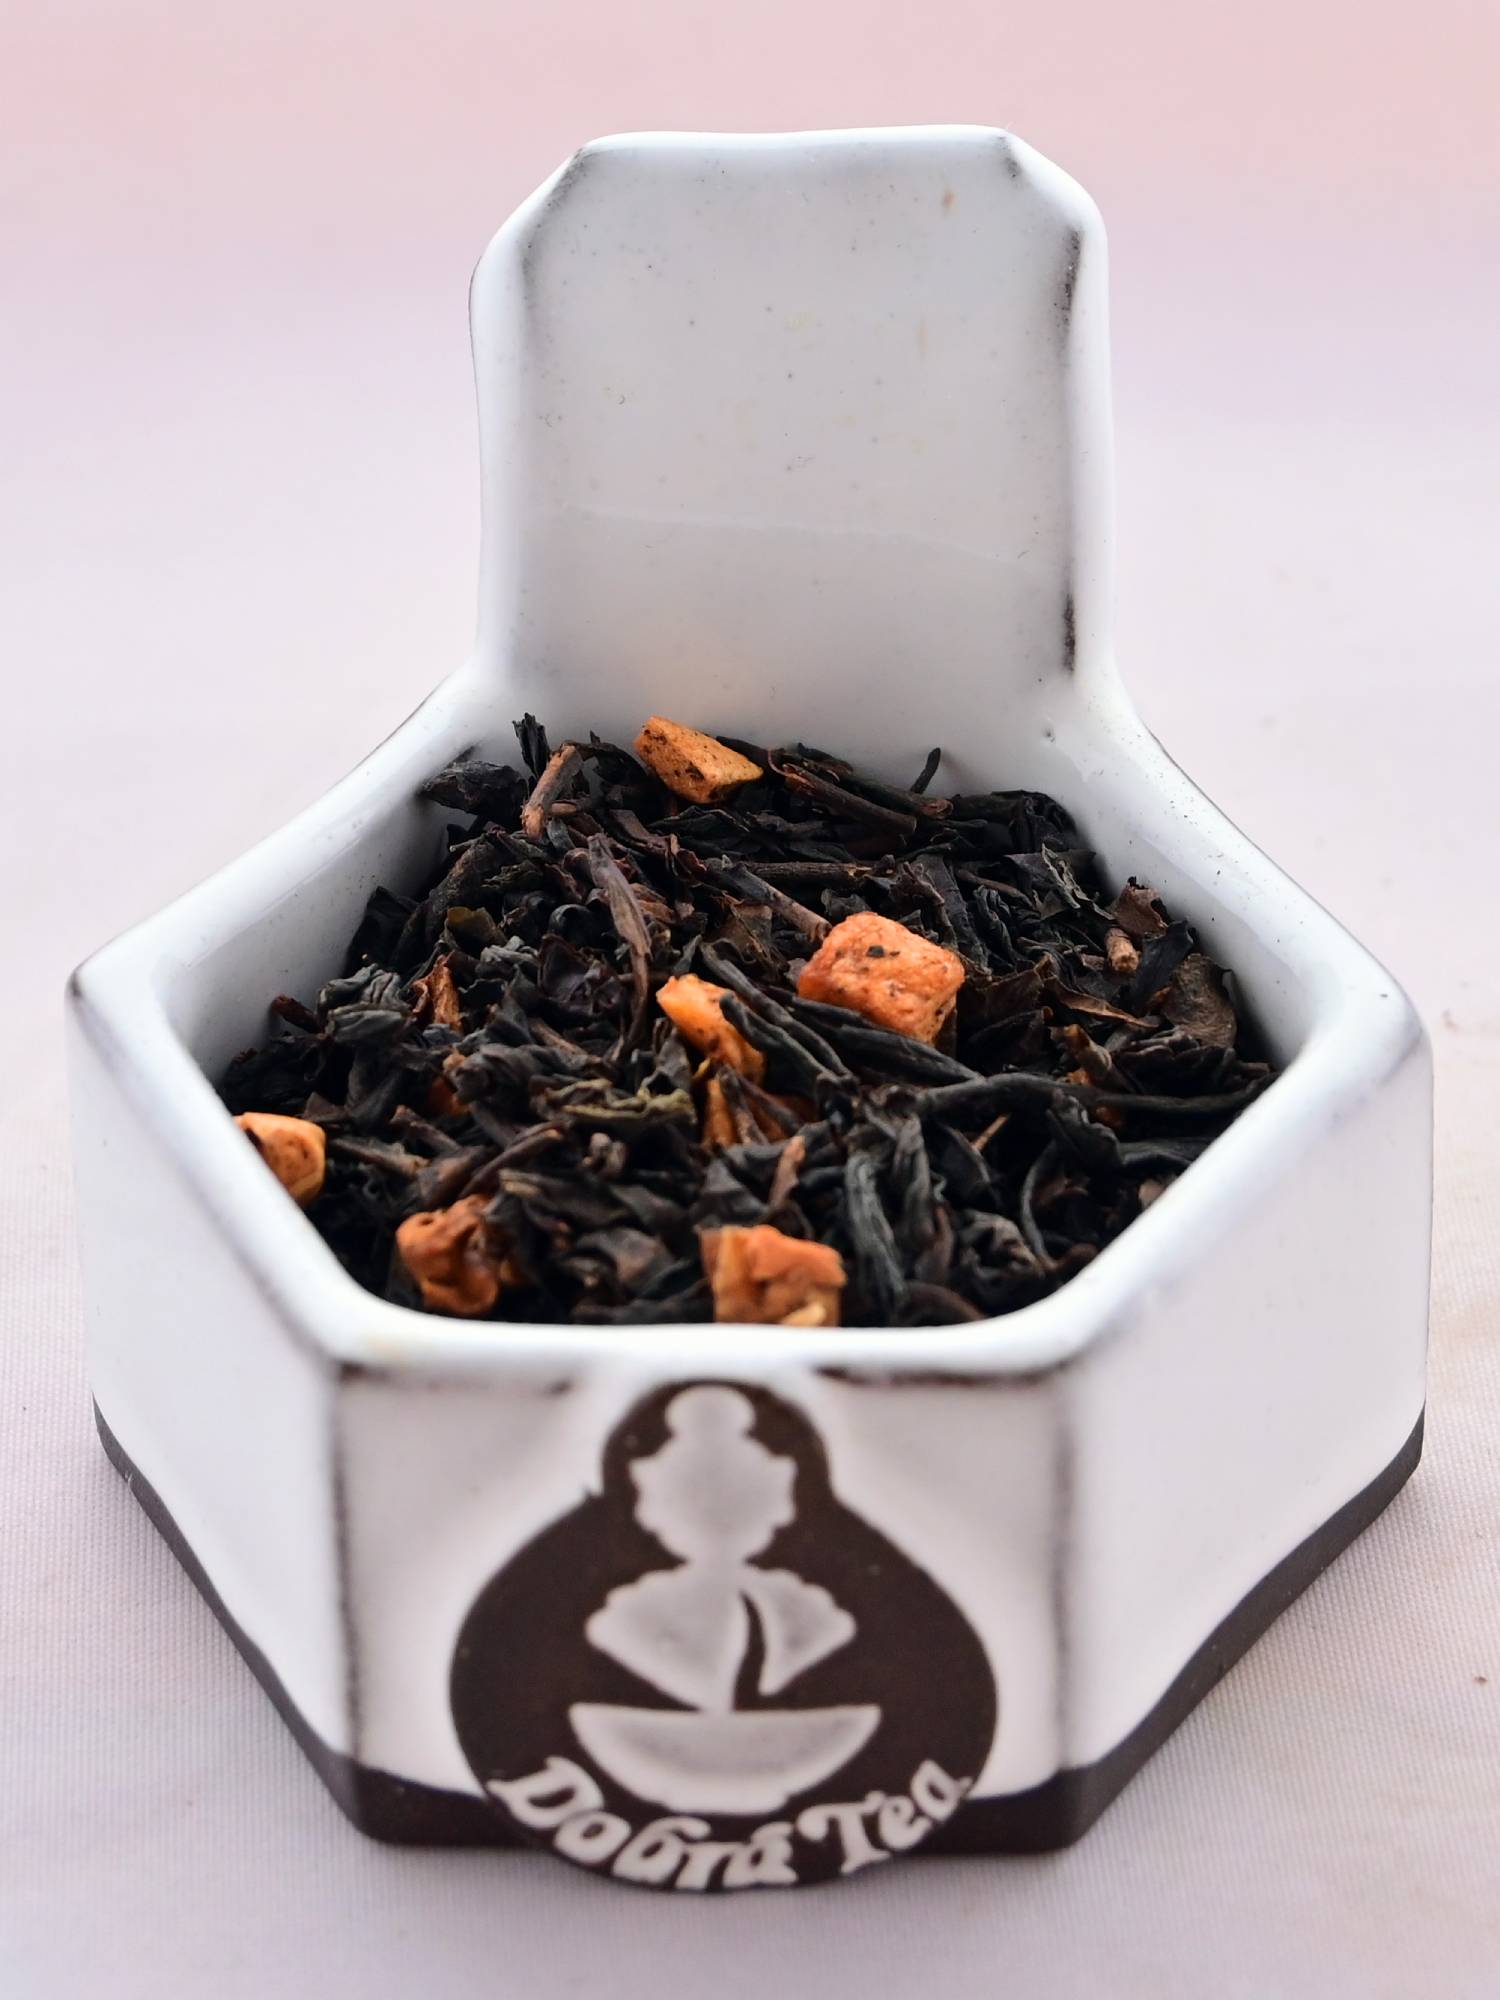 A close-up of Plum Tea leaves. Black and dark brown tea leaves that are partially rolled cling together around cubes of dried plum.